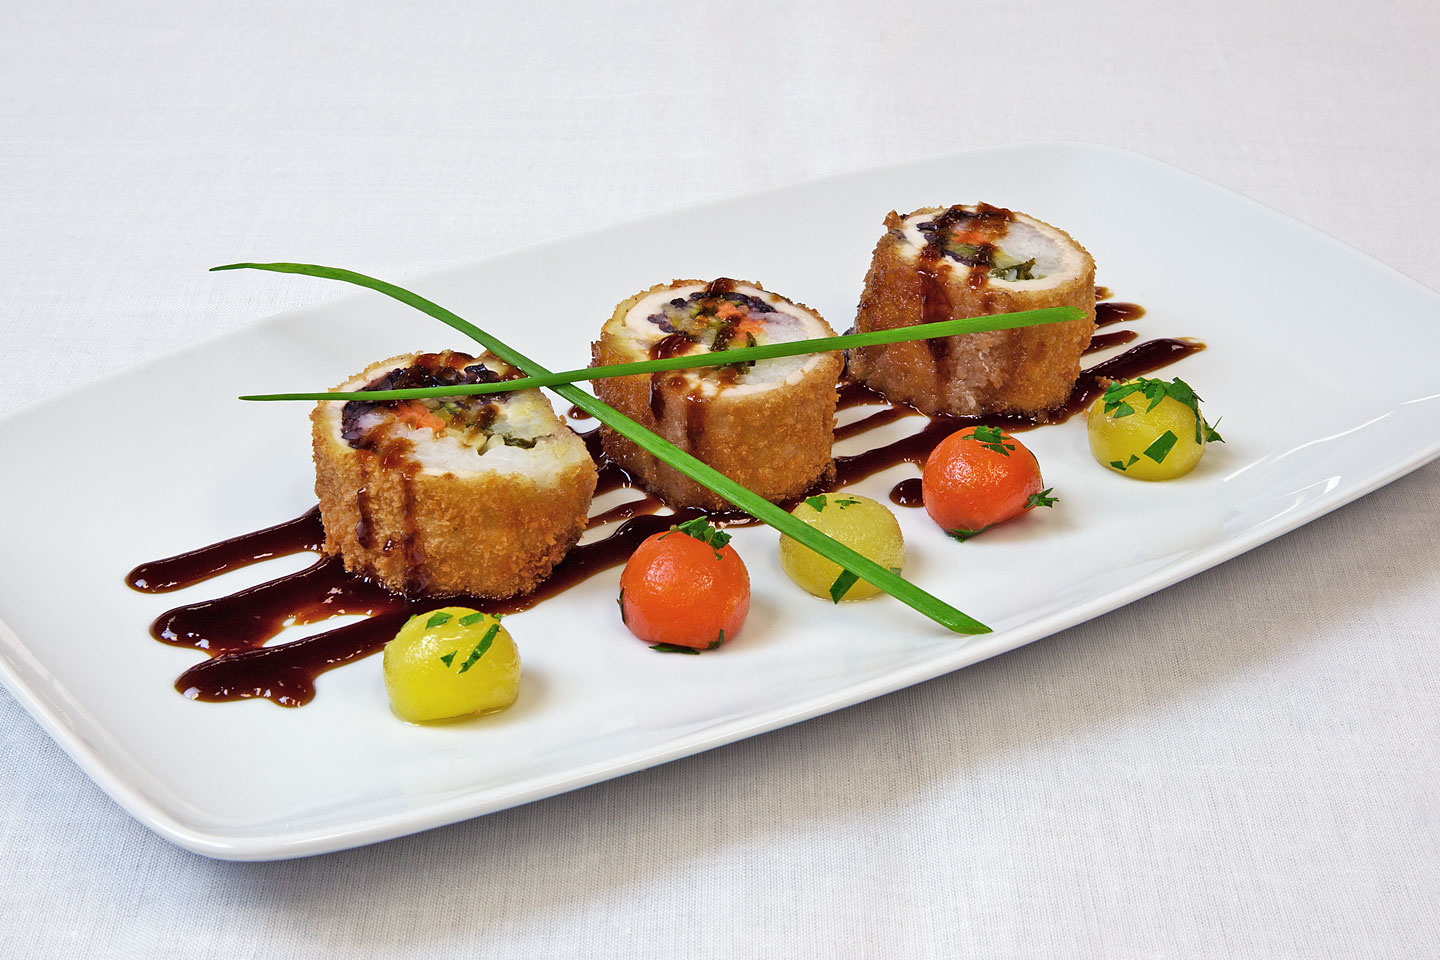 a delicious appetizer prepared by danziger kosher catering and served on a square oval porcelain plate